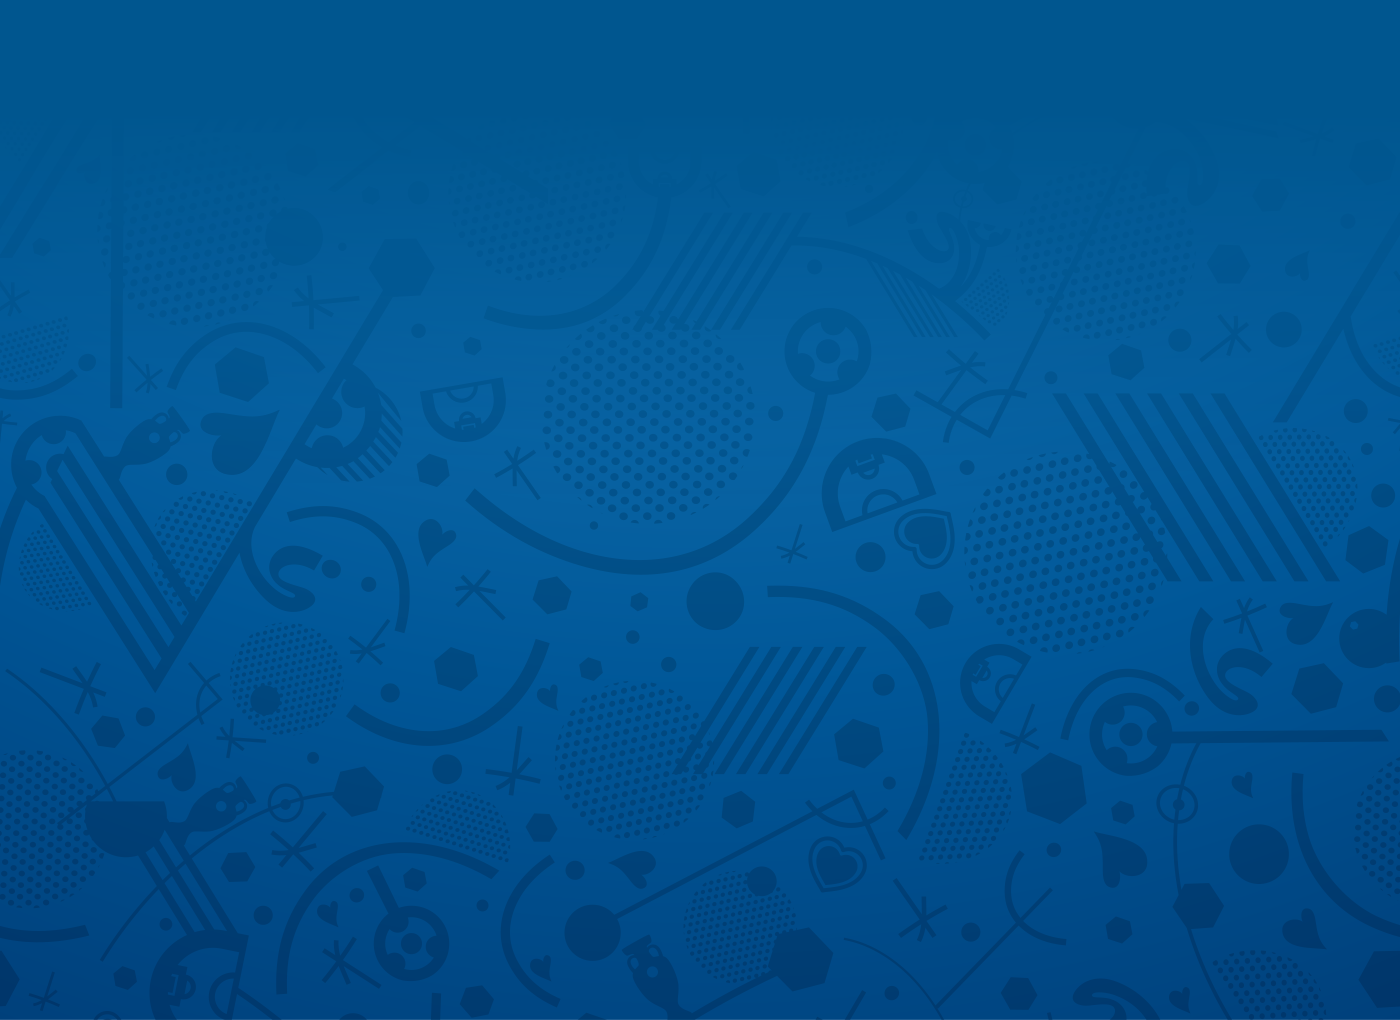 Nice Images Collection: UEFA Euro 2016 Desktop Wallpapers